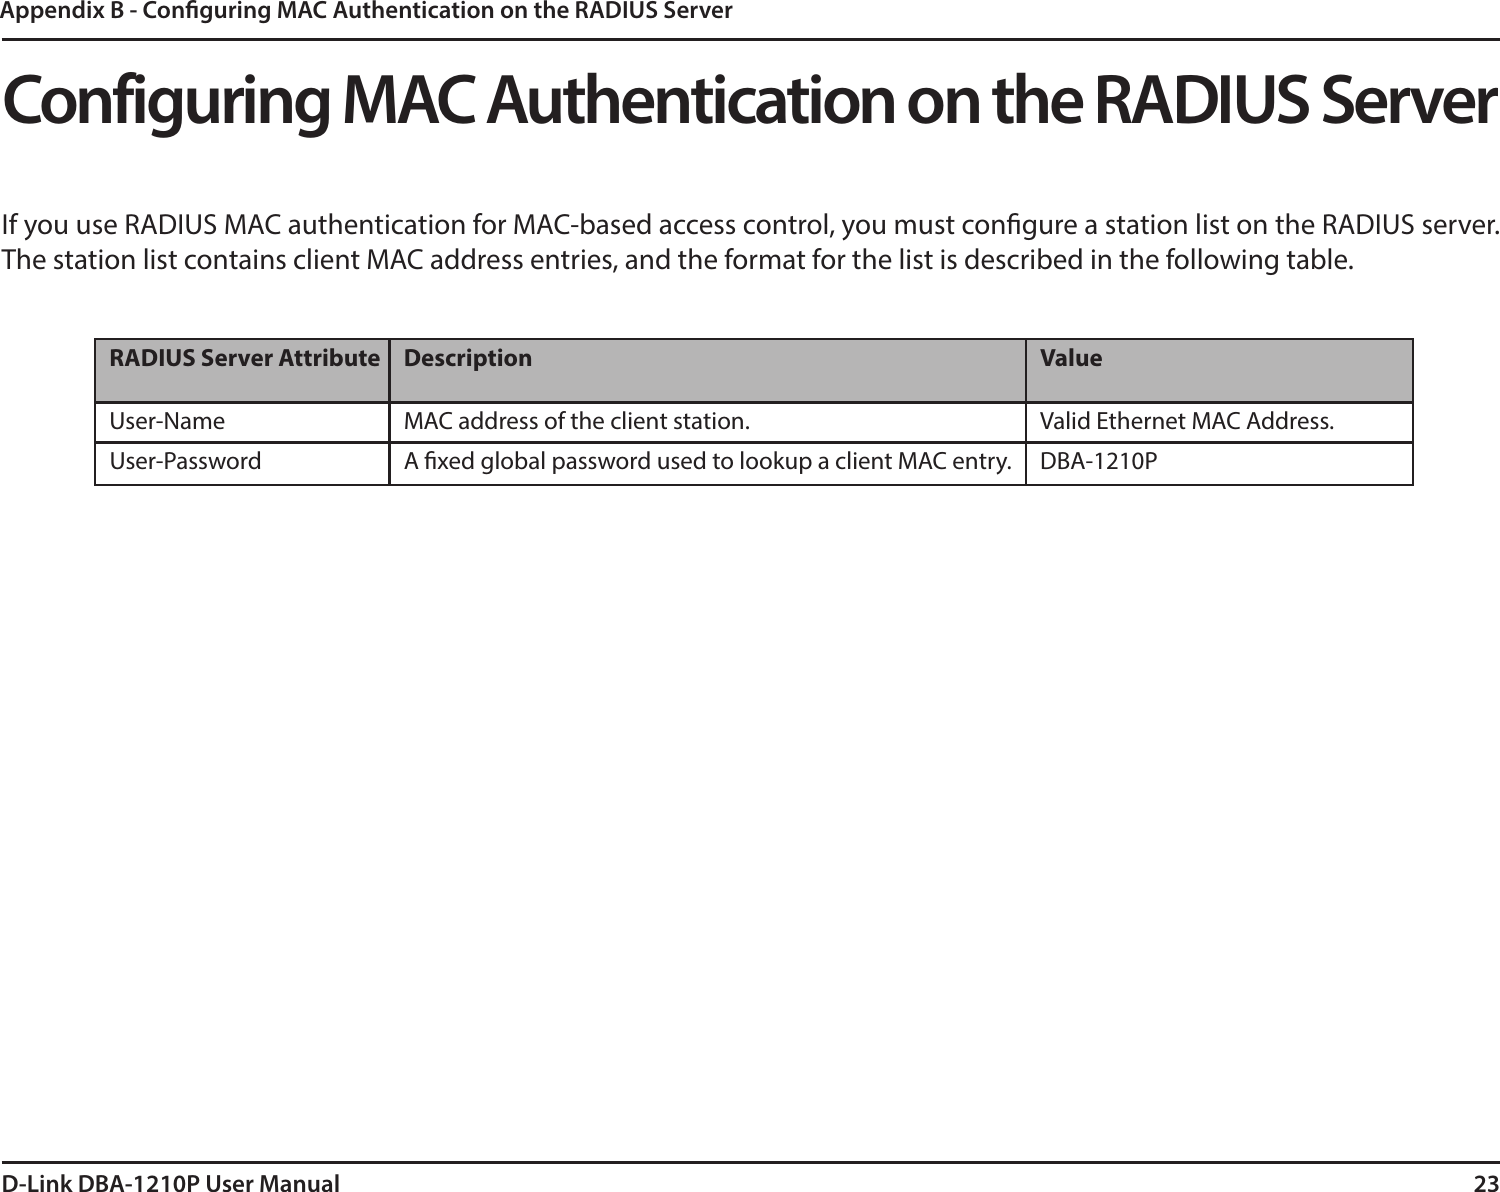 23D-Link DBA-1210P User ManualAppendix B - Conguring MAC Authentication on the RADIUS ServerConfiguring MAC Authentication on the RADIUS ServerIf you use RADIUS MAC authentication for MAC-based access control, you must congure a station list on the RADIUS server. The station list contains client MAC address entries, and the format for the list is described in the following table. RADIUS Server Attribute Description ValueUser-Name MAC address of the client station. Valid Ethernet MAC Address.User-Password A xed global password used to lookup a client MAC entry. DBA-1210P